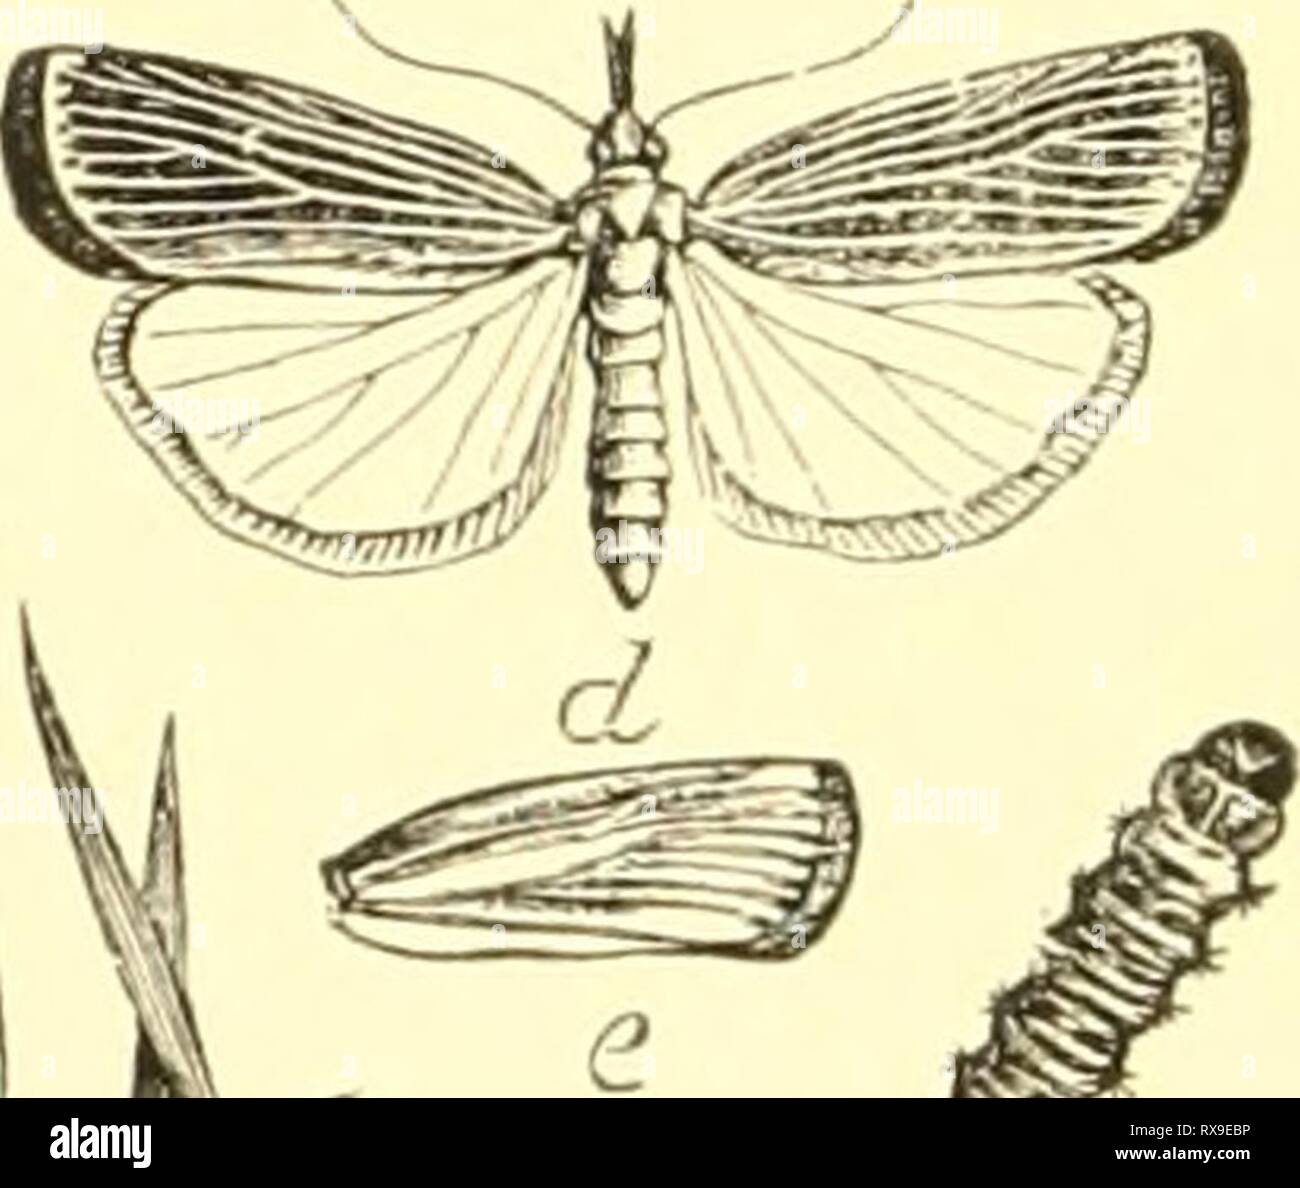 Economic entomology for the farmer Economic entomology for the farmer and the fruit grower, and for use as a text-book in agricultural schools and colleges; economicentomolo00smit Year: 1906  -jJteiC^,^.^^^ '5«- Crambus vulvivaf;elhi!i.—a, larva ; b, over-, and r, underground tube and cocoon ; d, e, /, moths with wuigs spread and at rest ; g, an egg much enlarged. up or f&lt;^lded closely, giving the insect a little the appearance ot a tiny cylinder. The head is small, not at all retracted, and usually furnished with very long palpi that project straight out like a snout ; as a whole, resembli Stock Photo